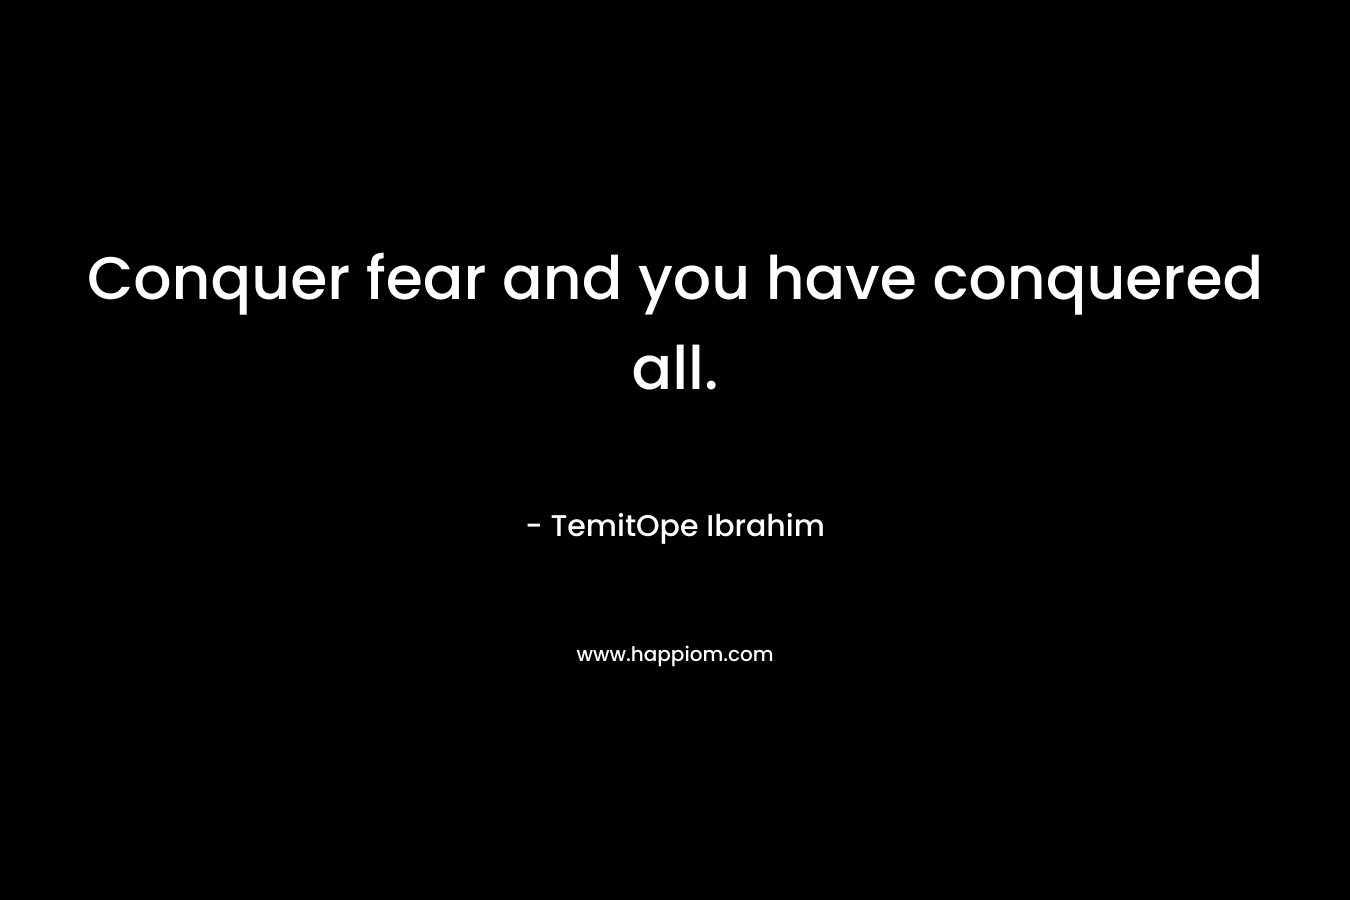 Conquer fear and you have conquered all.